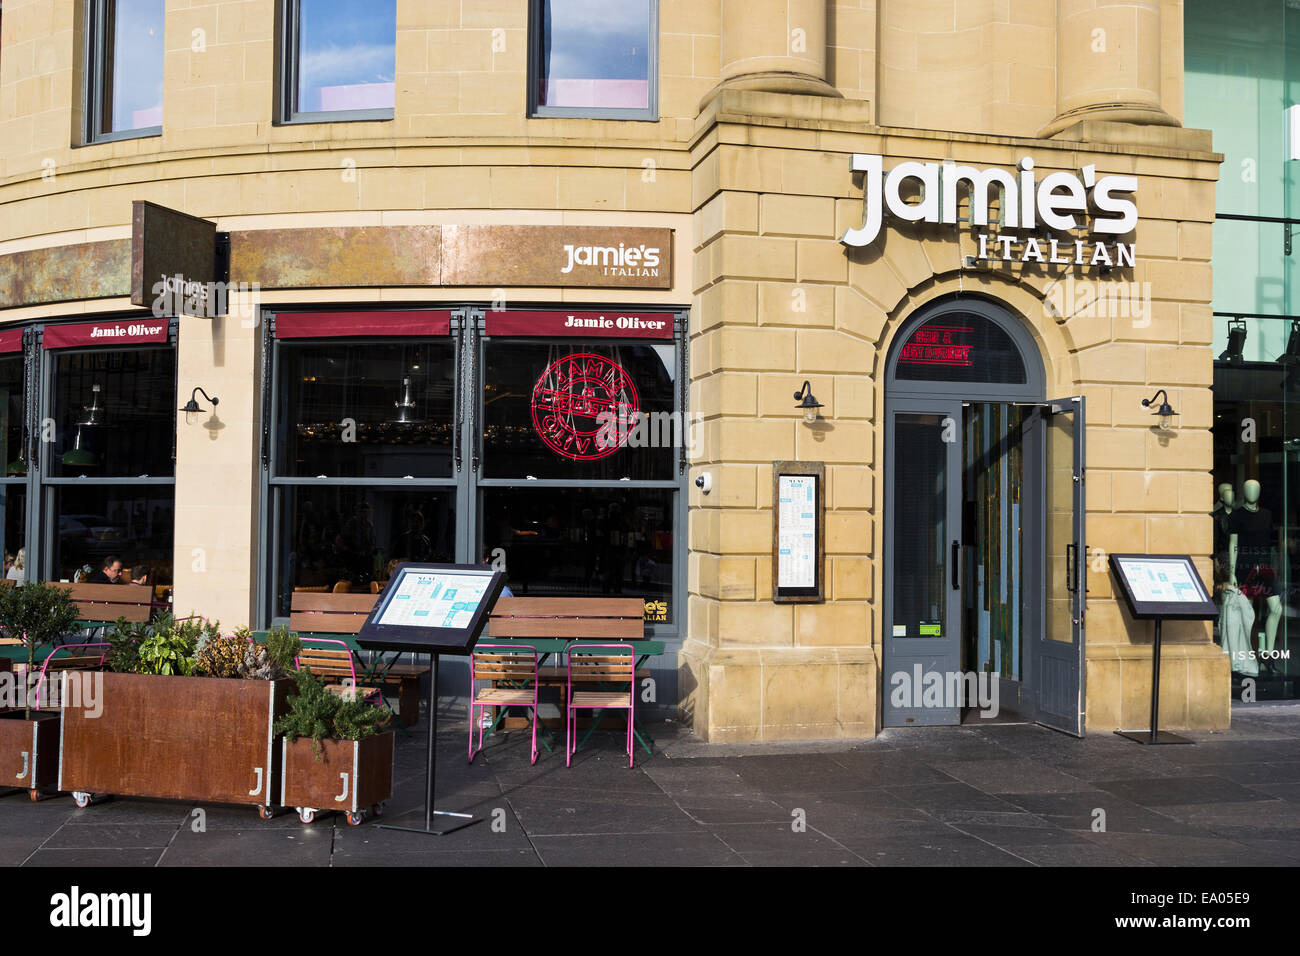 Jamie Oliver Italian restaurant at Newcastle upon Tyne showing exterior with diners inside and menu boards outside. Stock Photo